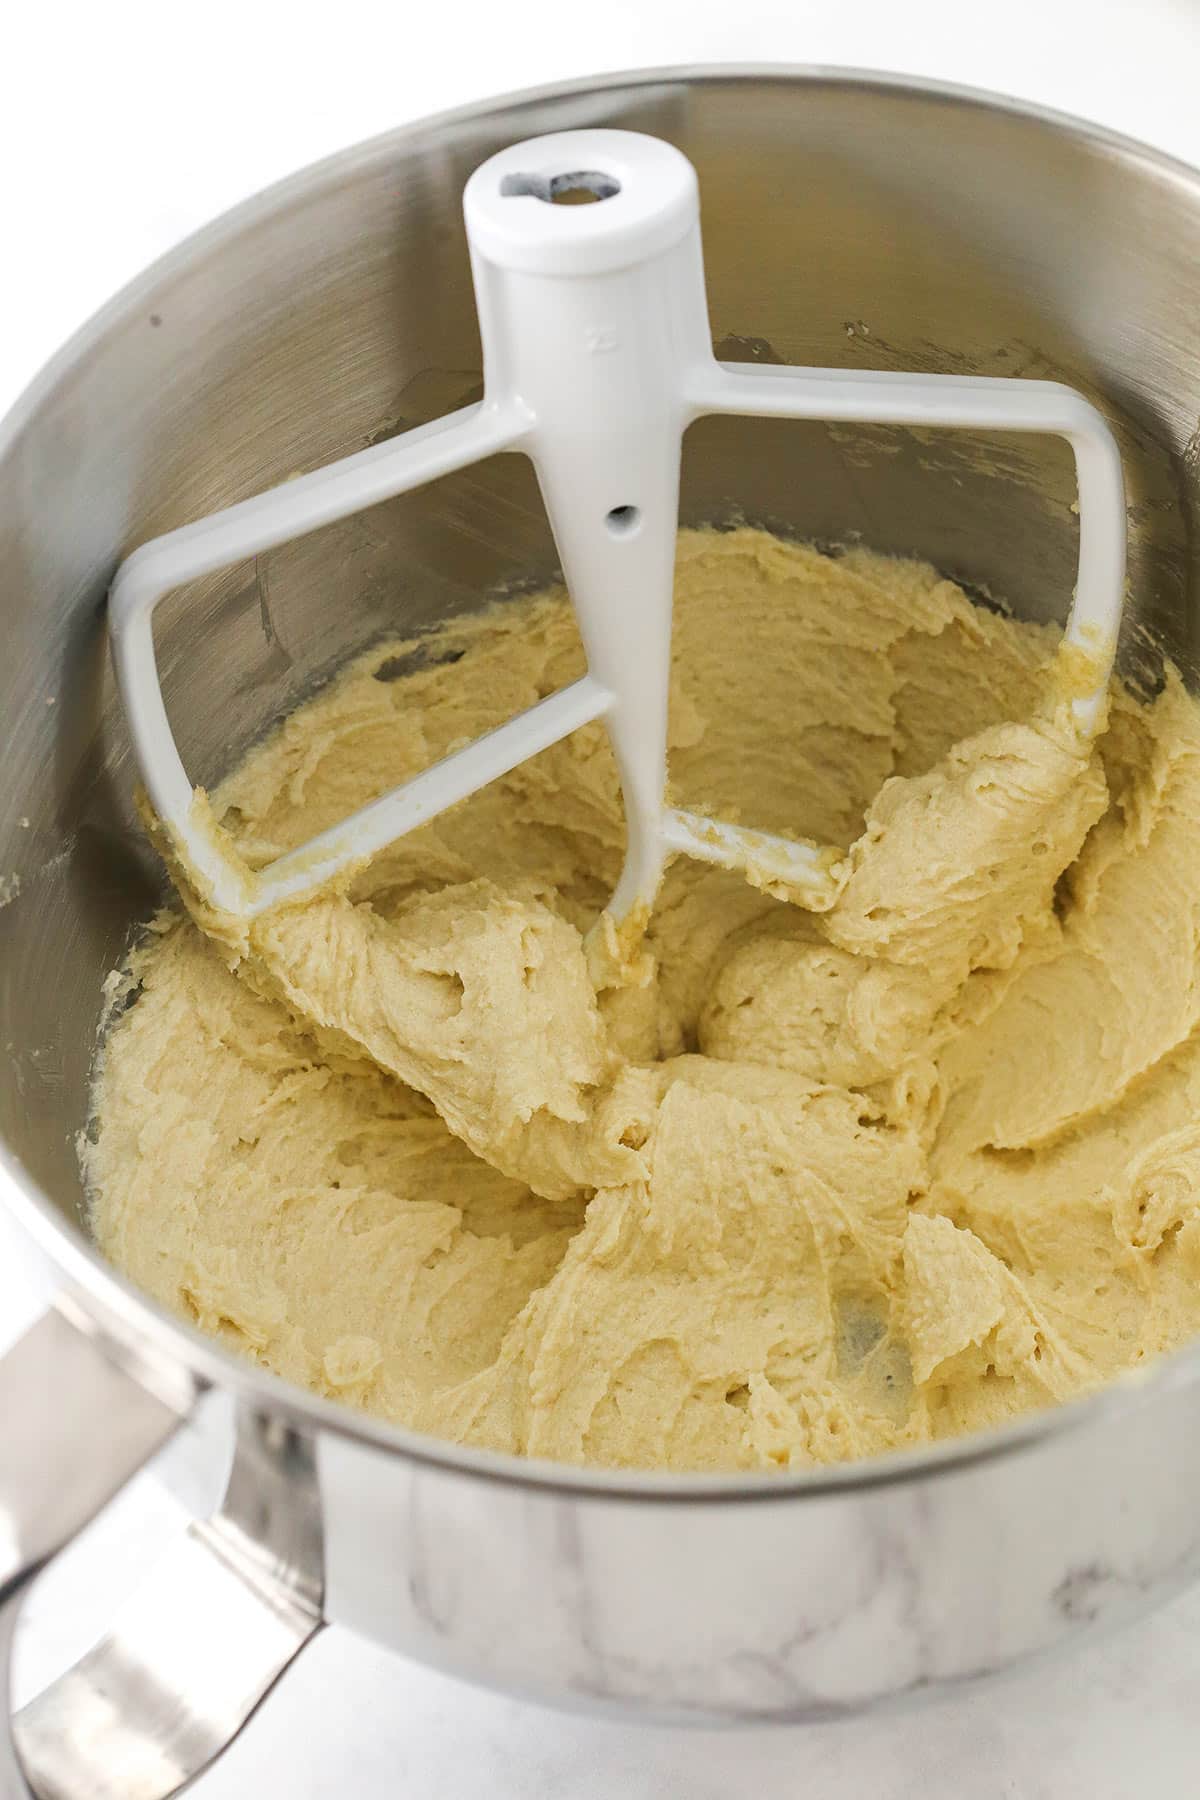 A creamy mixture of butter, sugar, egg and vanilla in an electric mixer bowl